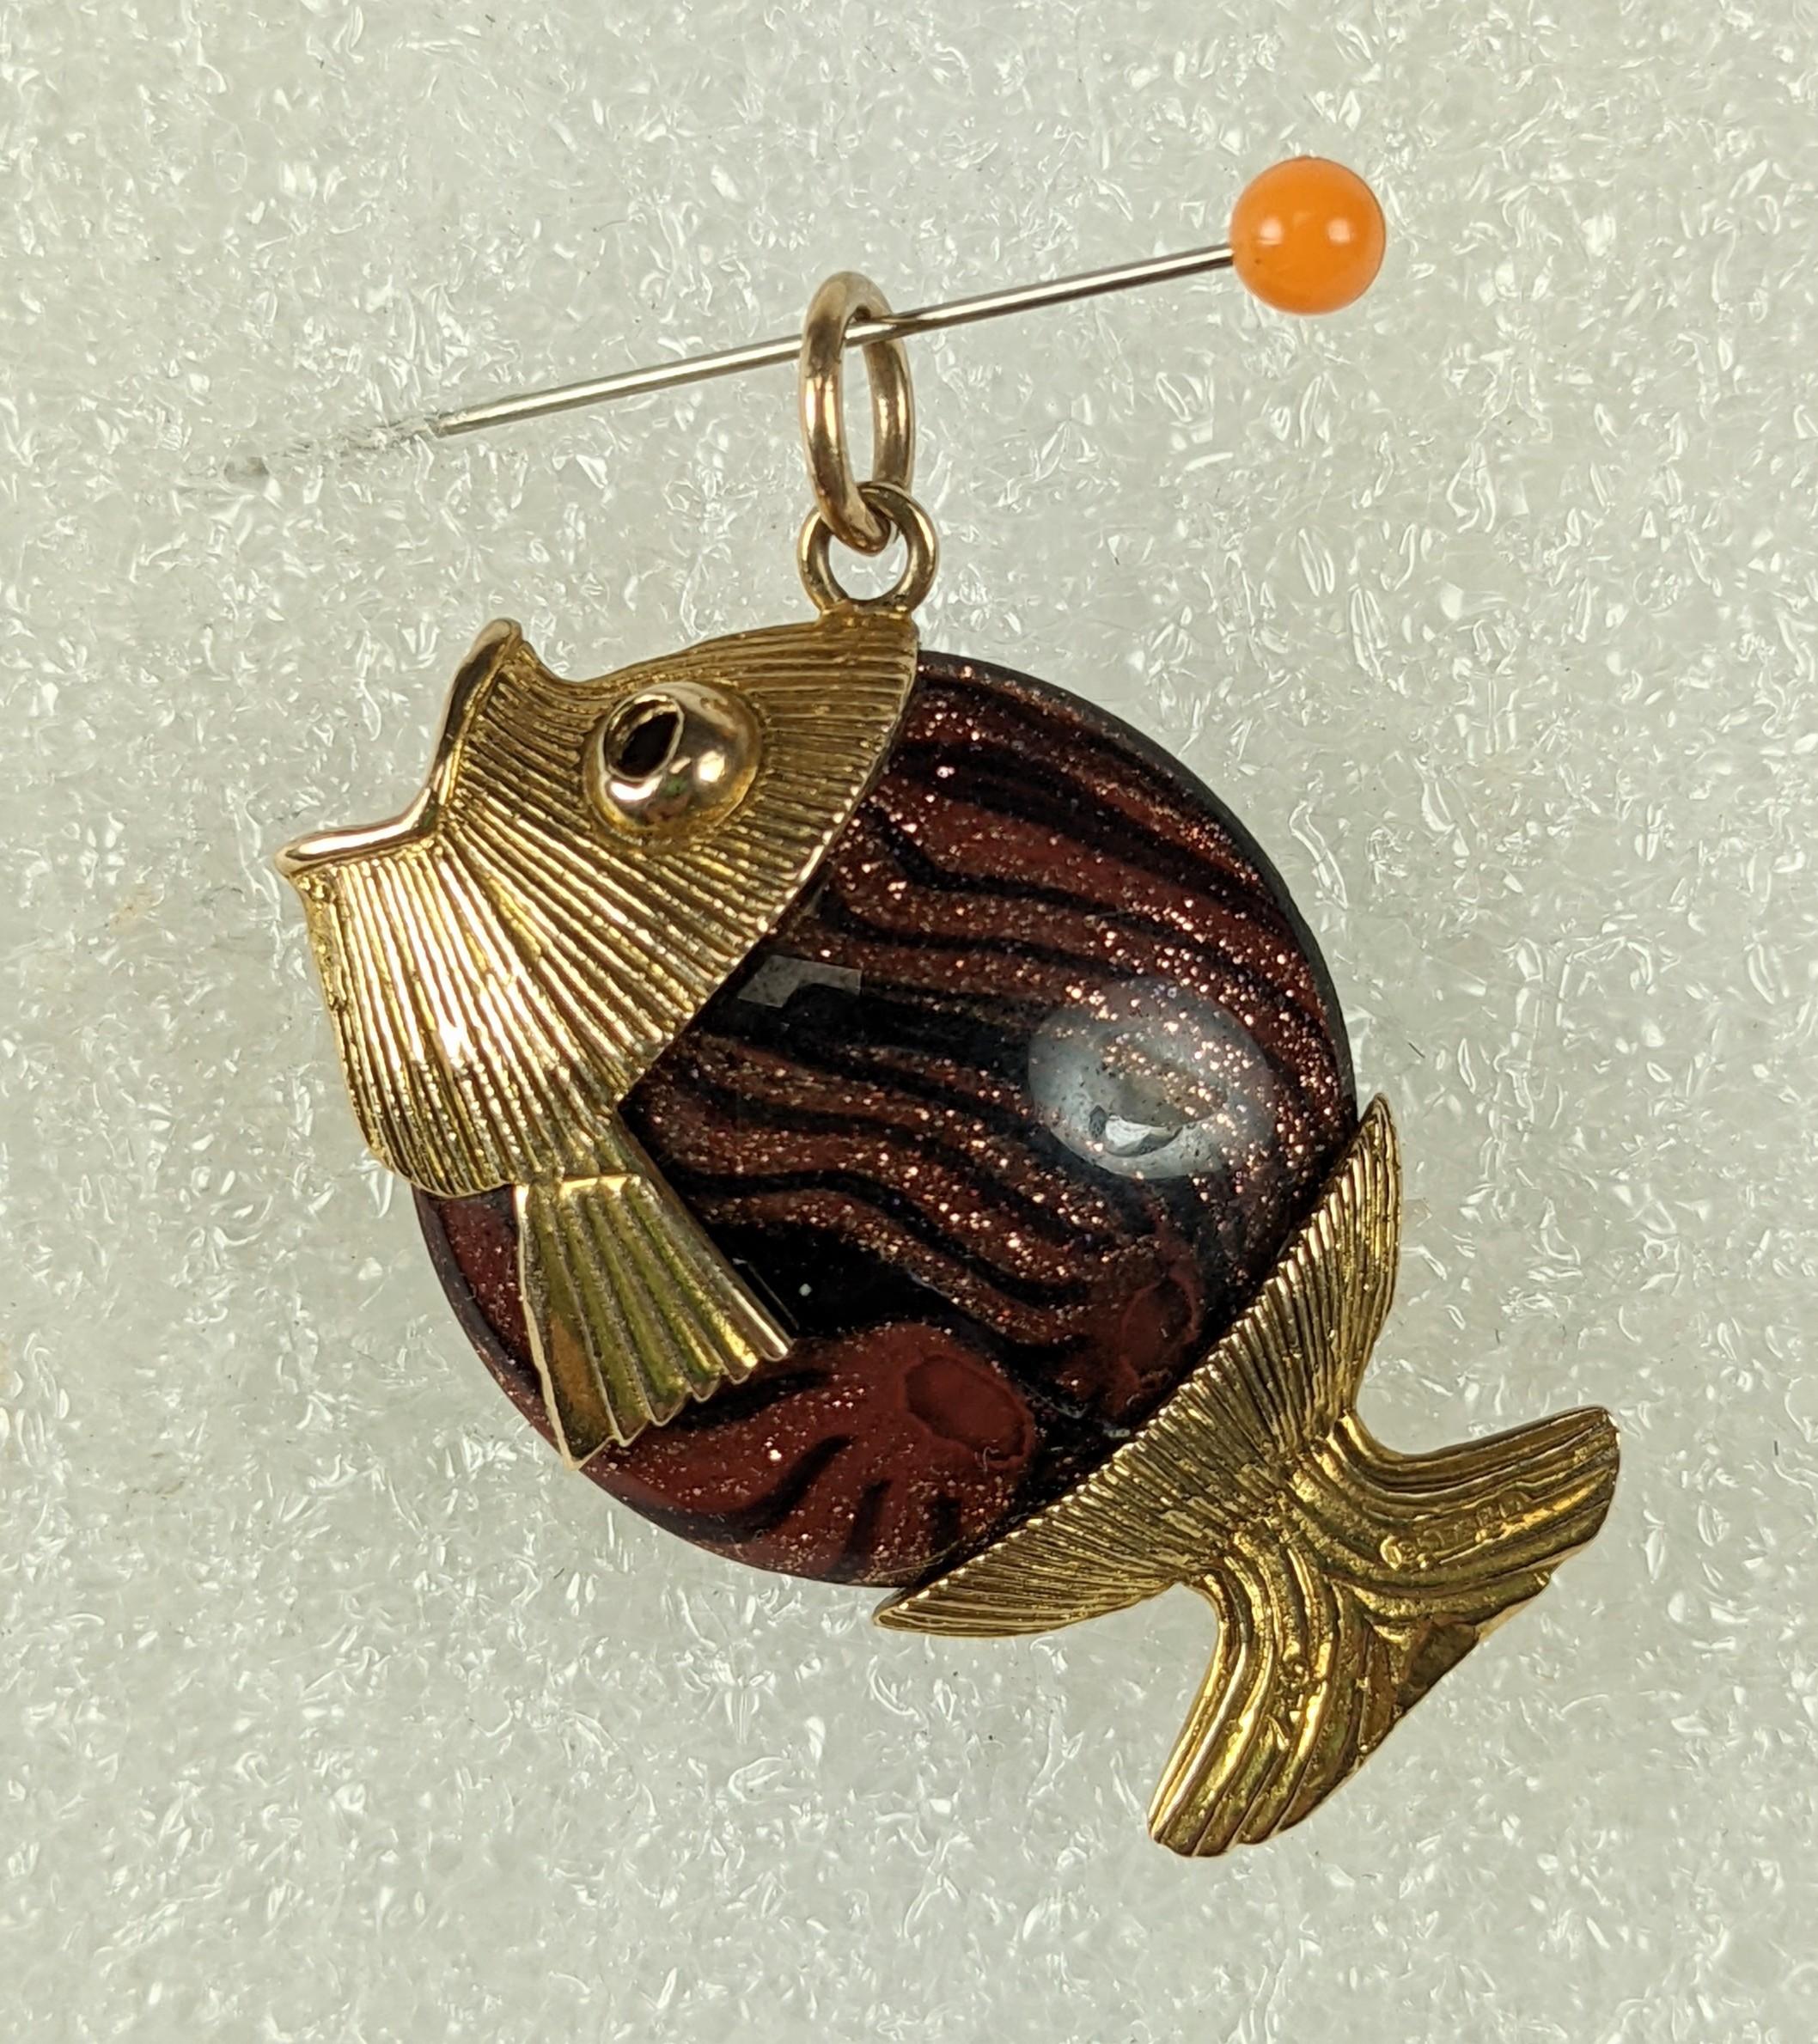 Charming English 9K Murano Fish Charm from the 1970's. Murano striated glass of metallic copper and black is used to mimic natural goldstone. The head and tail are ribbed 9K gold and marked 